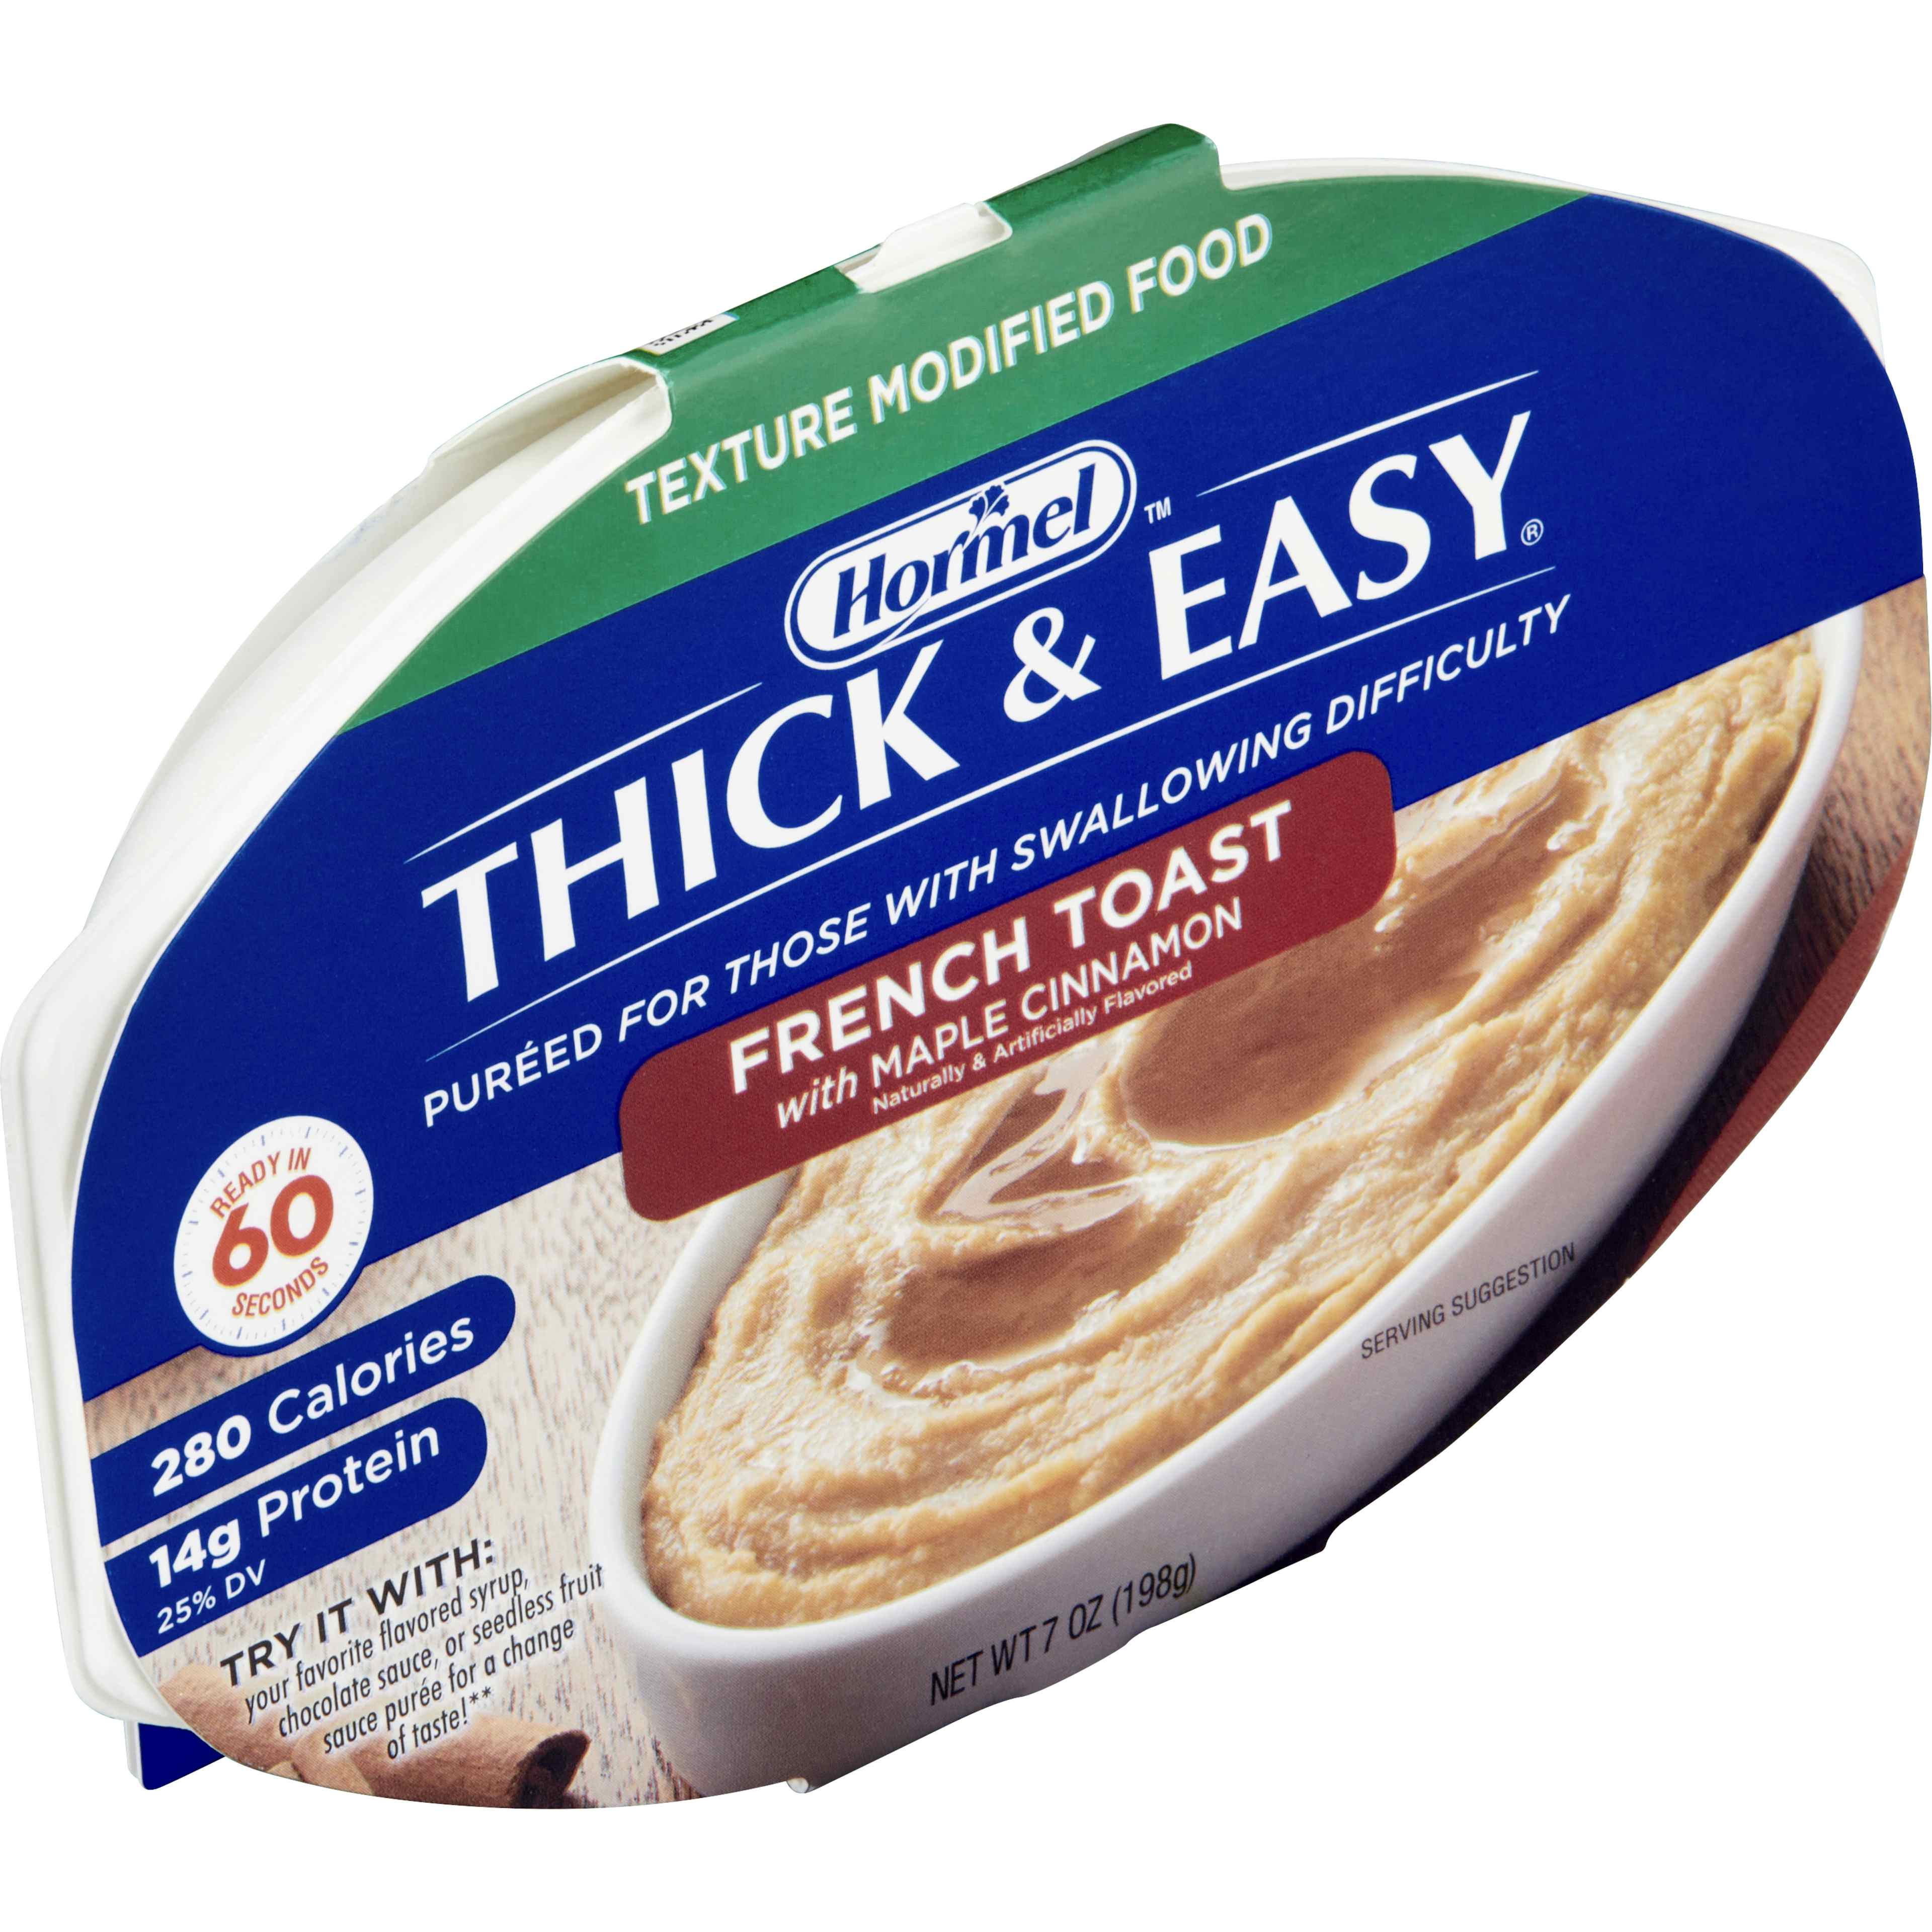 Thick & Easy Purees, Maple Cinnamon French Toast